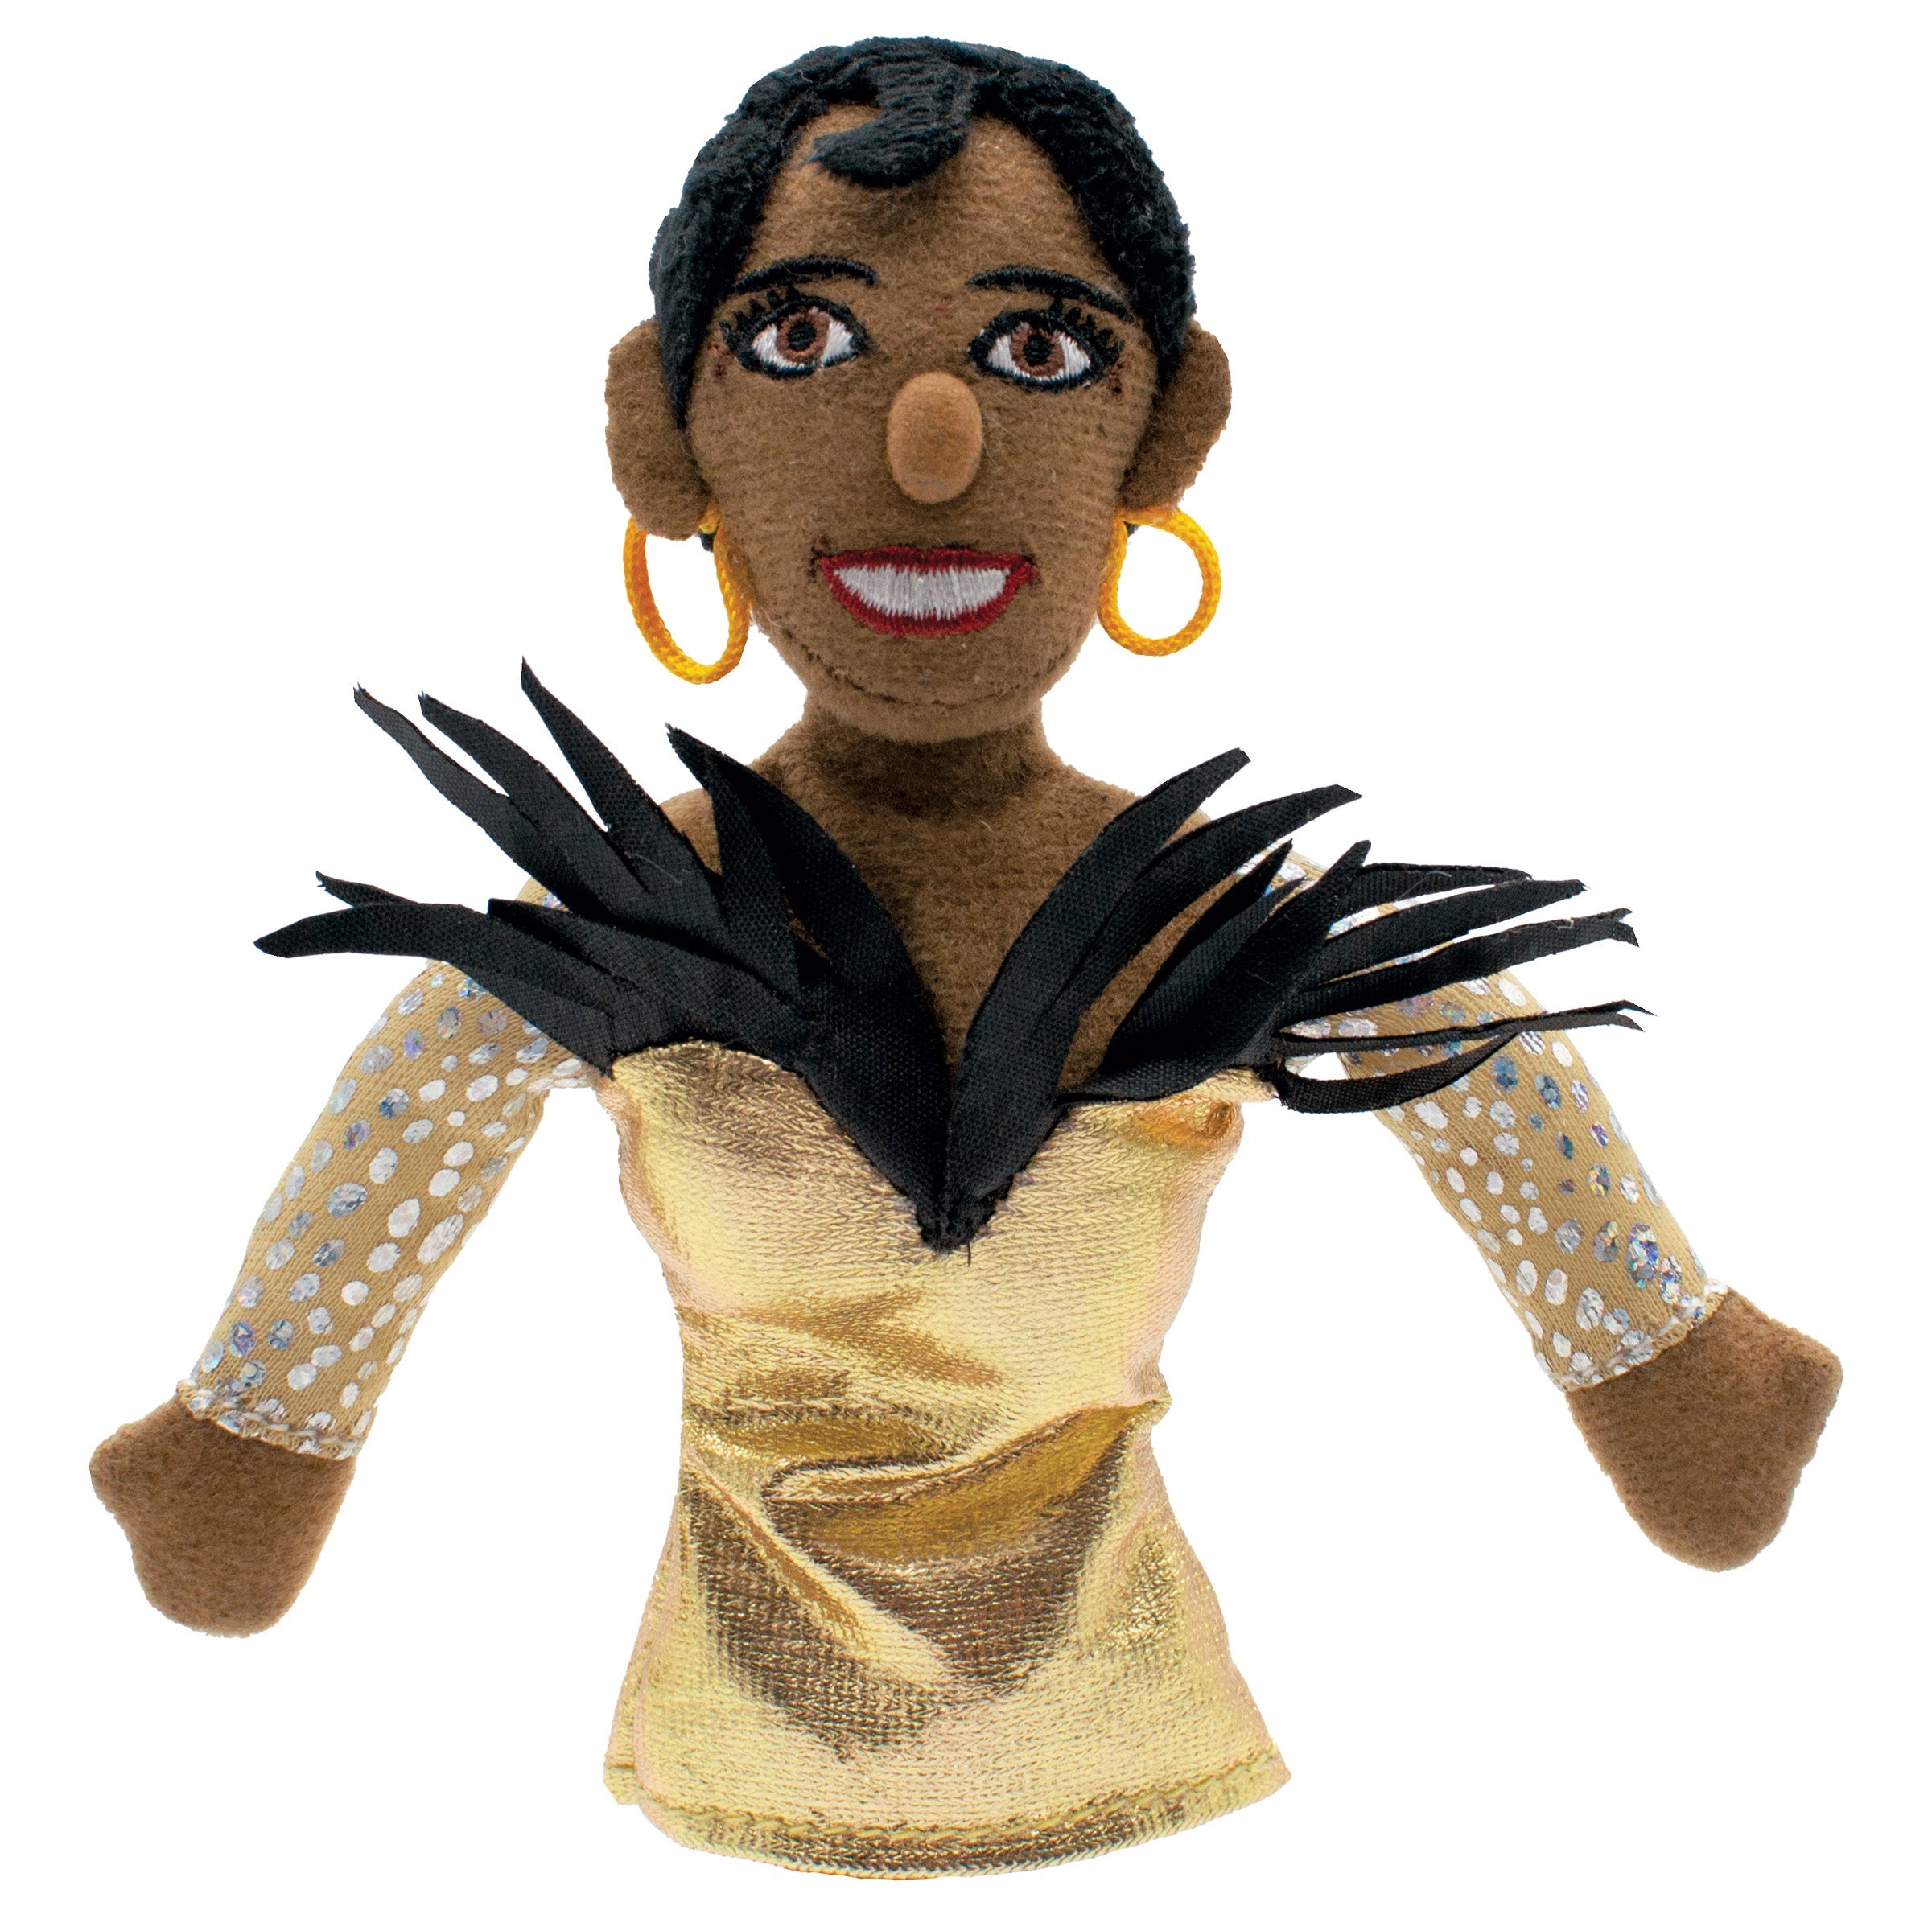 Product photo of Josephine Baker Magnetic Personality, a novelty gift manufactured by The Unemployed Philosophers Guild.